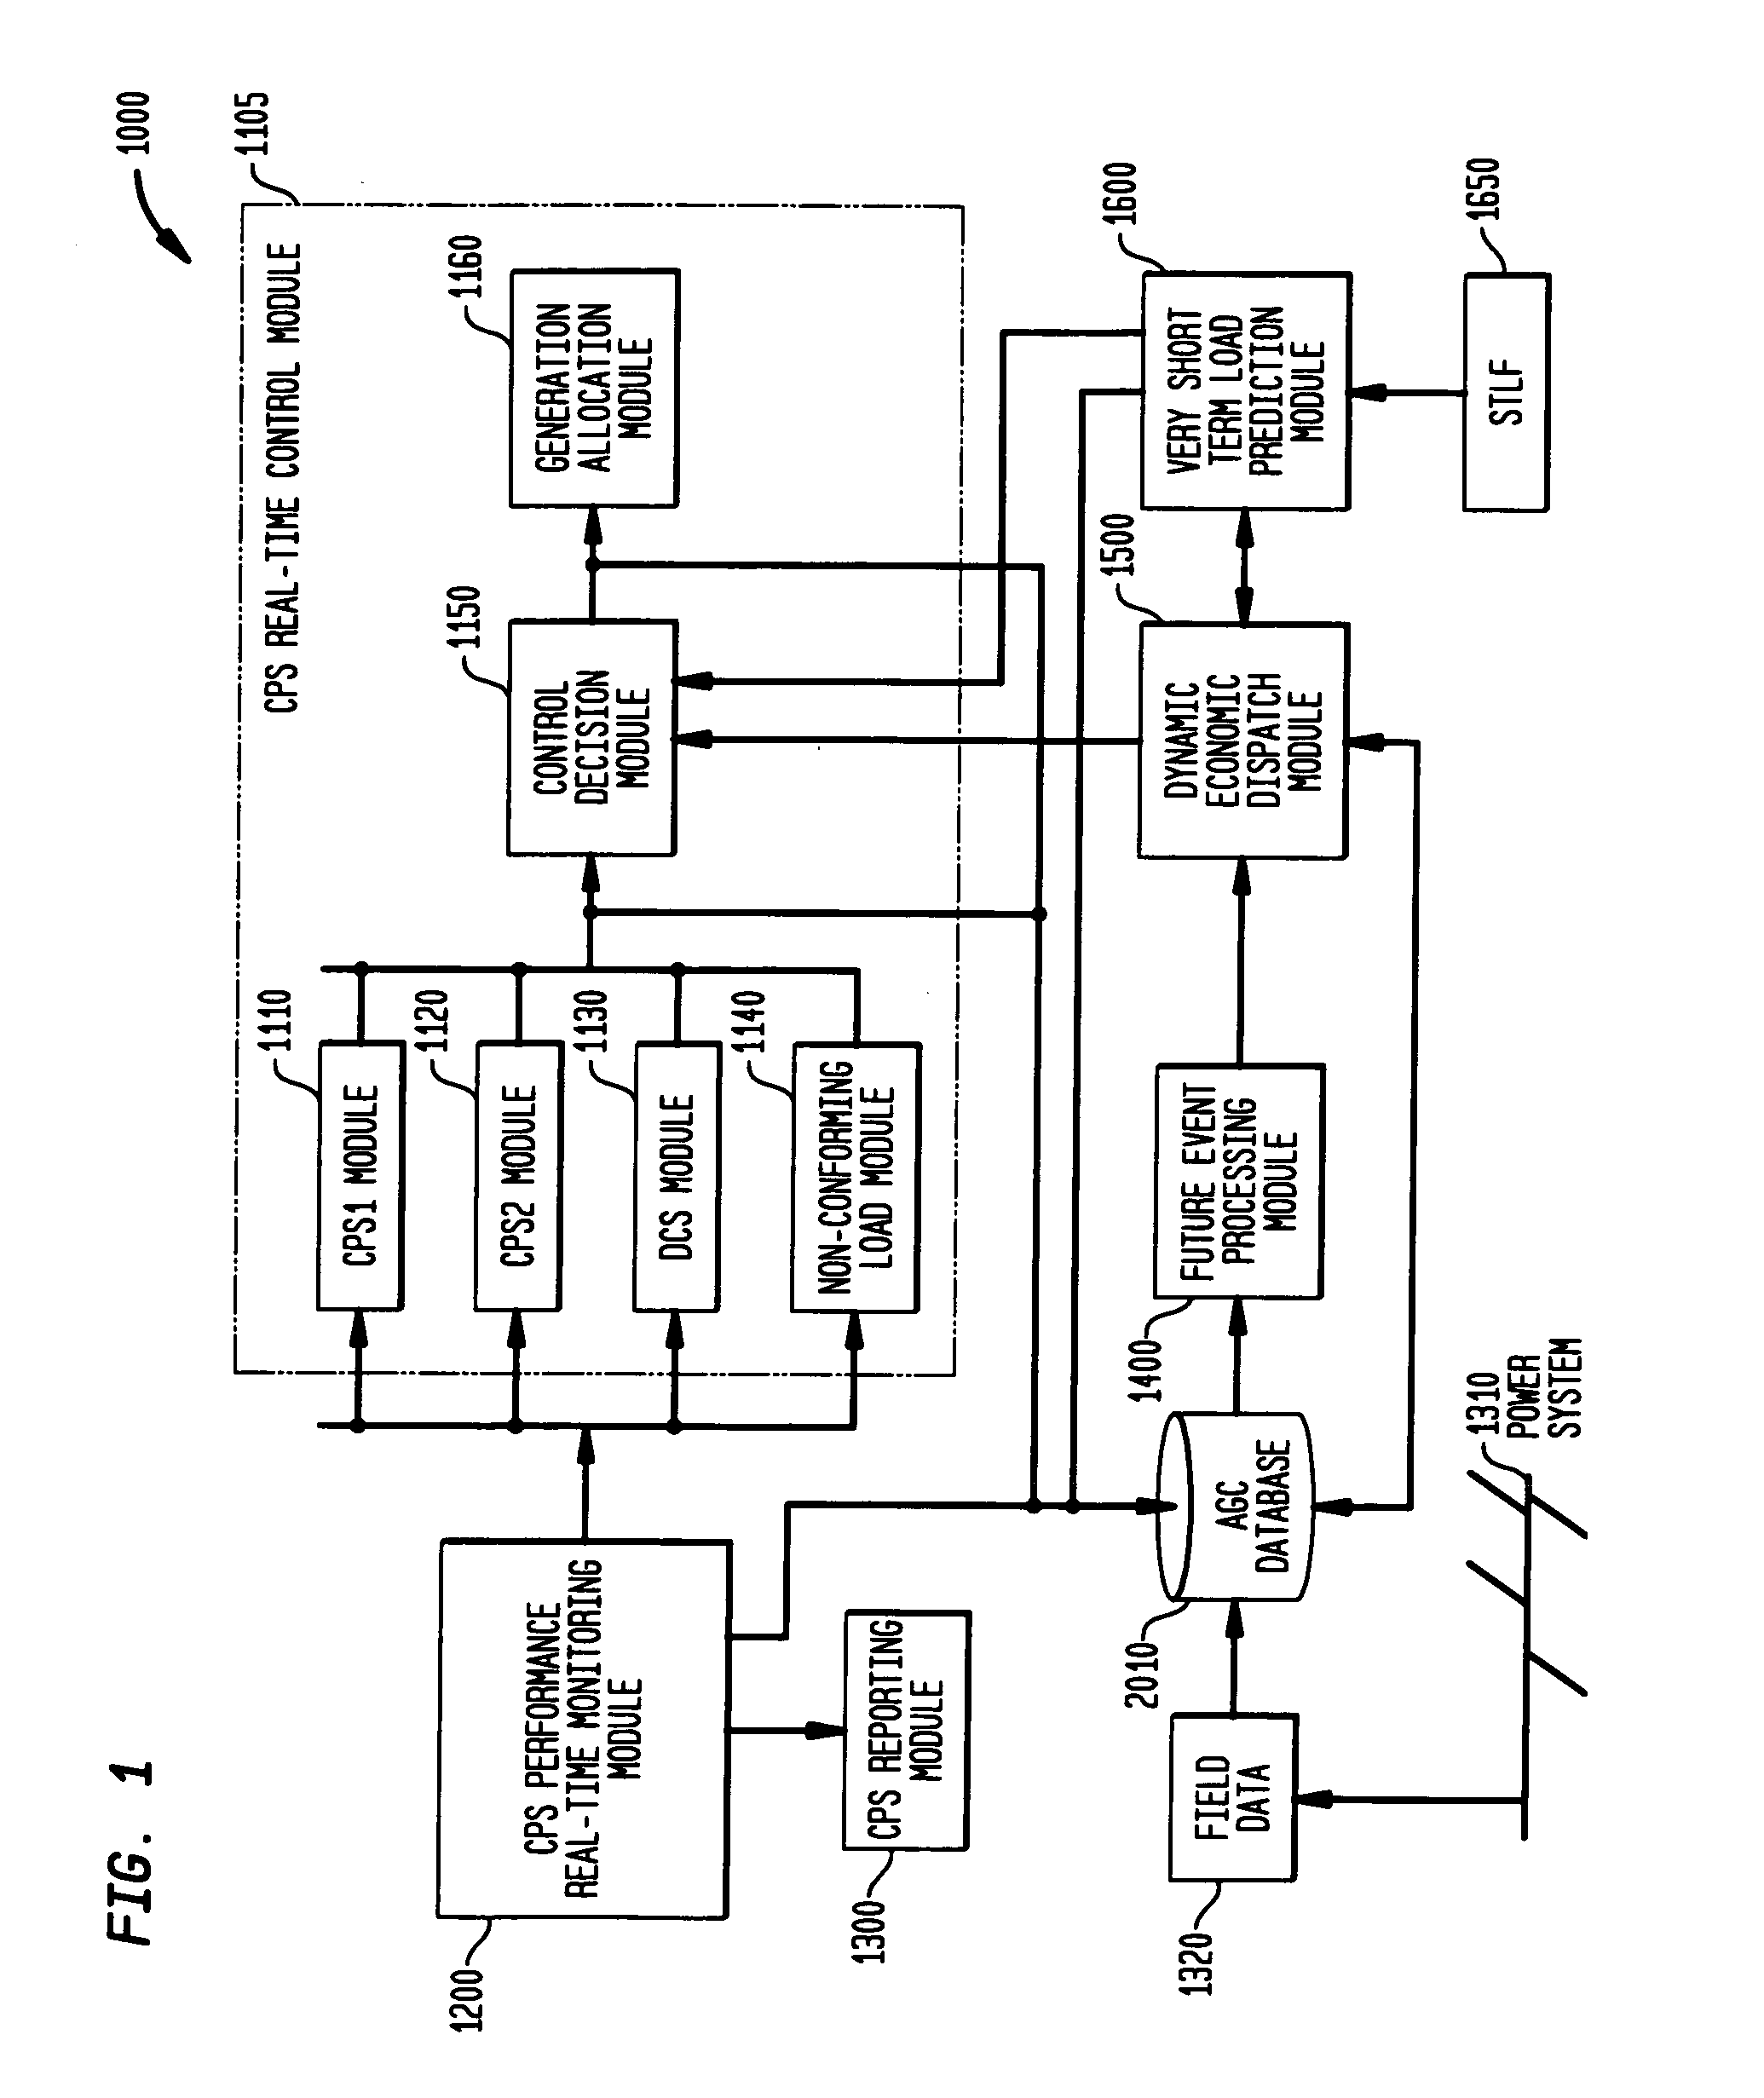 Energy management system in a power and distribution system